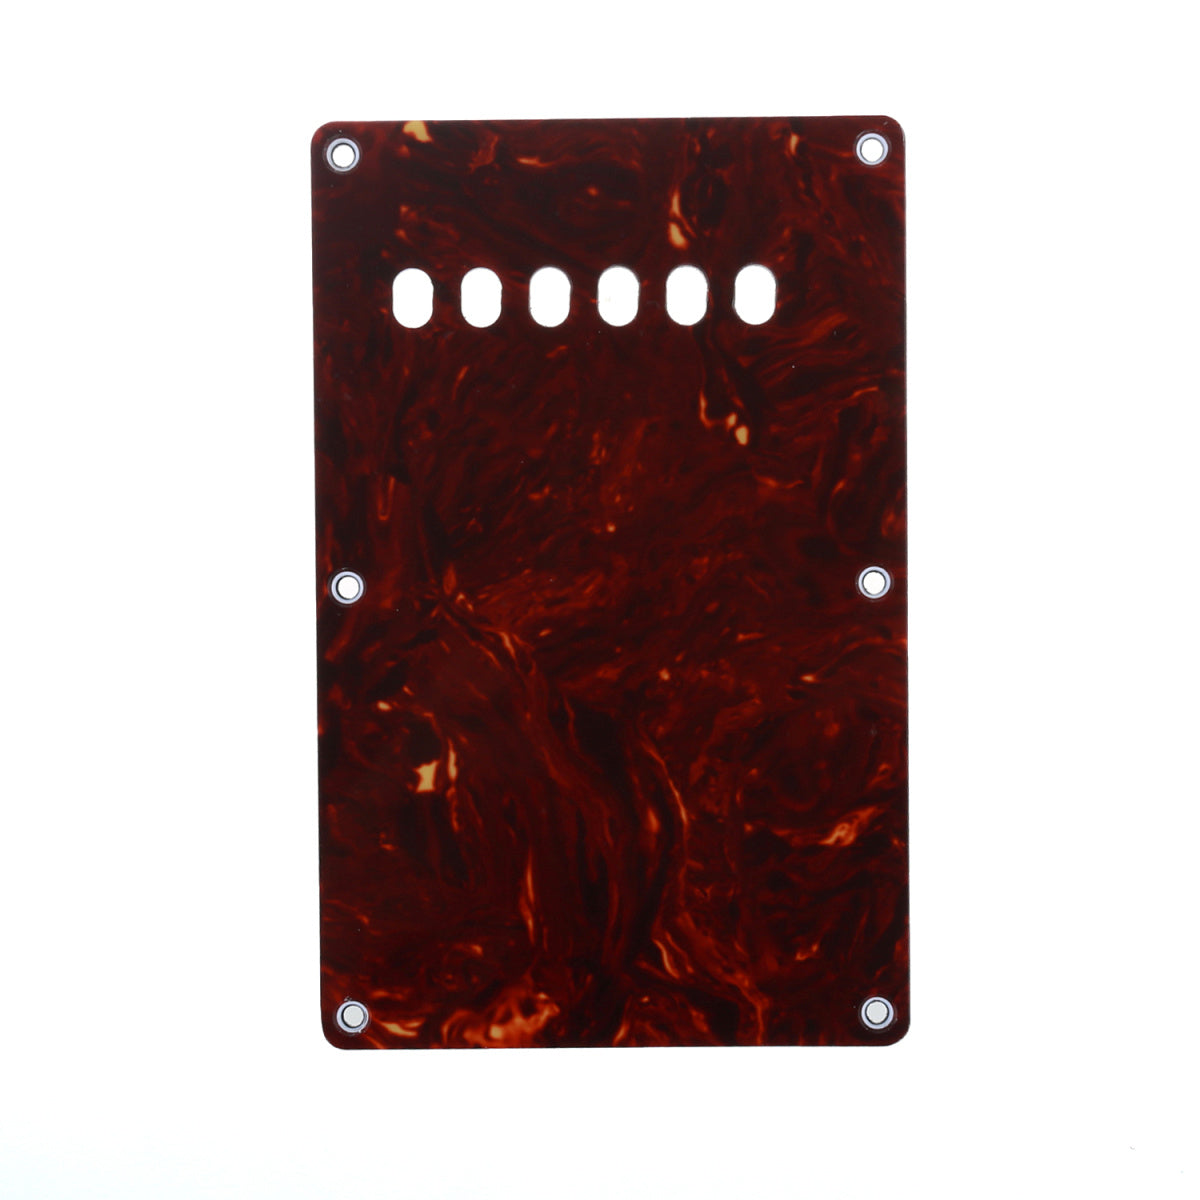 Musiclily 6 Hole Guitar Back Plate for China Made Squier, 4Ply Tortoise Shell